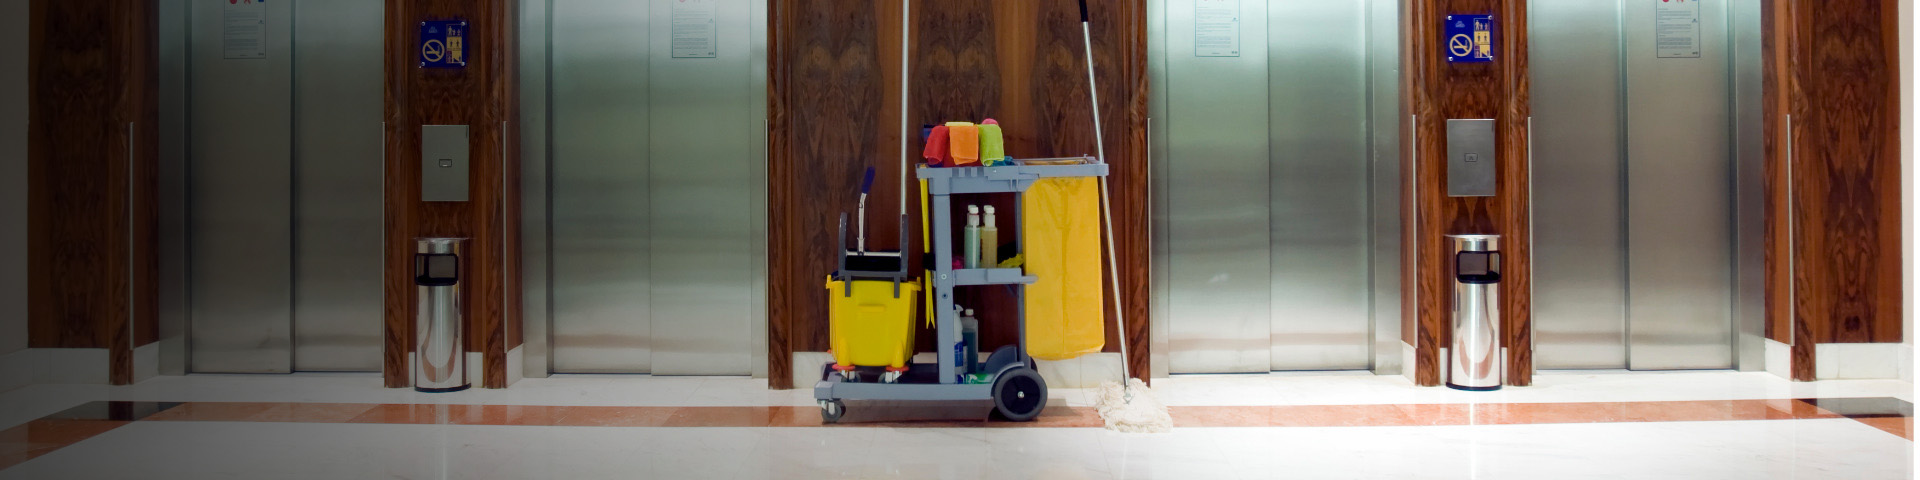 Cleaning cart situated outside elevators